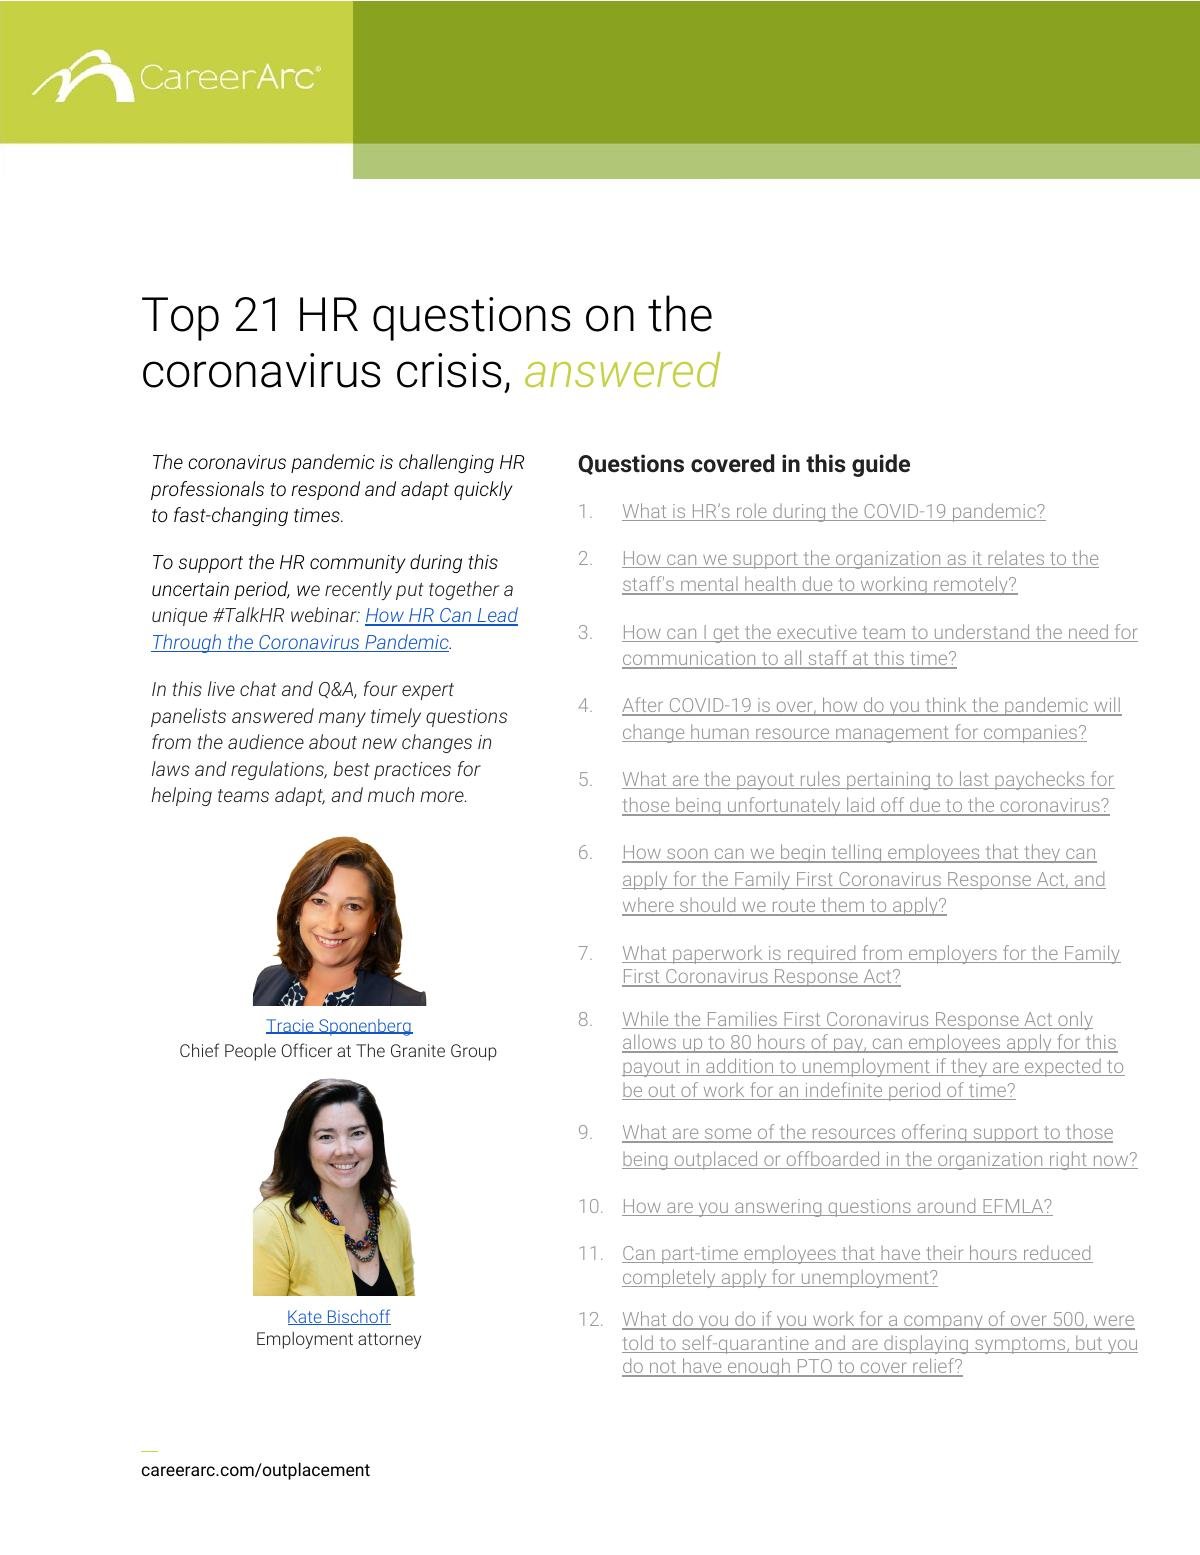 Top 21 HR questions on the coronavirus crisis, answered